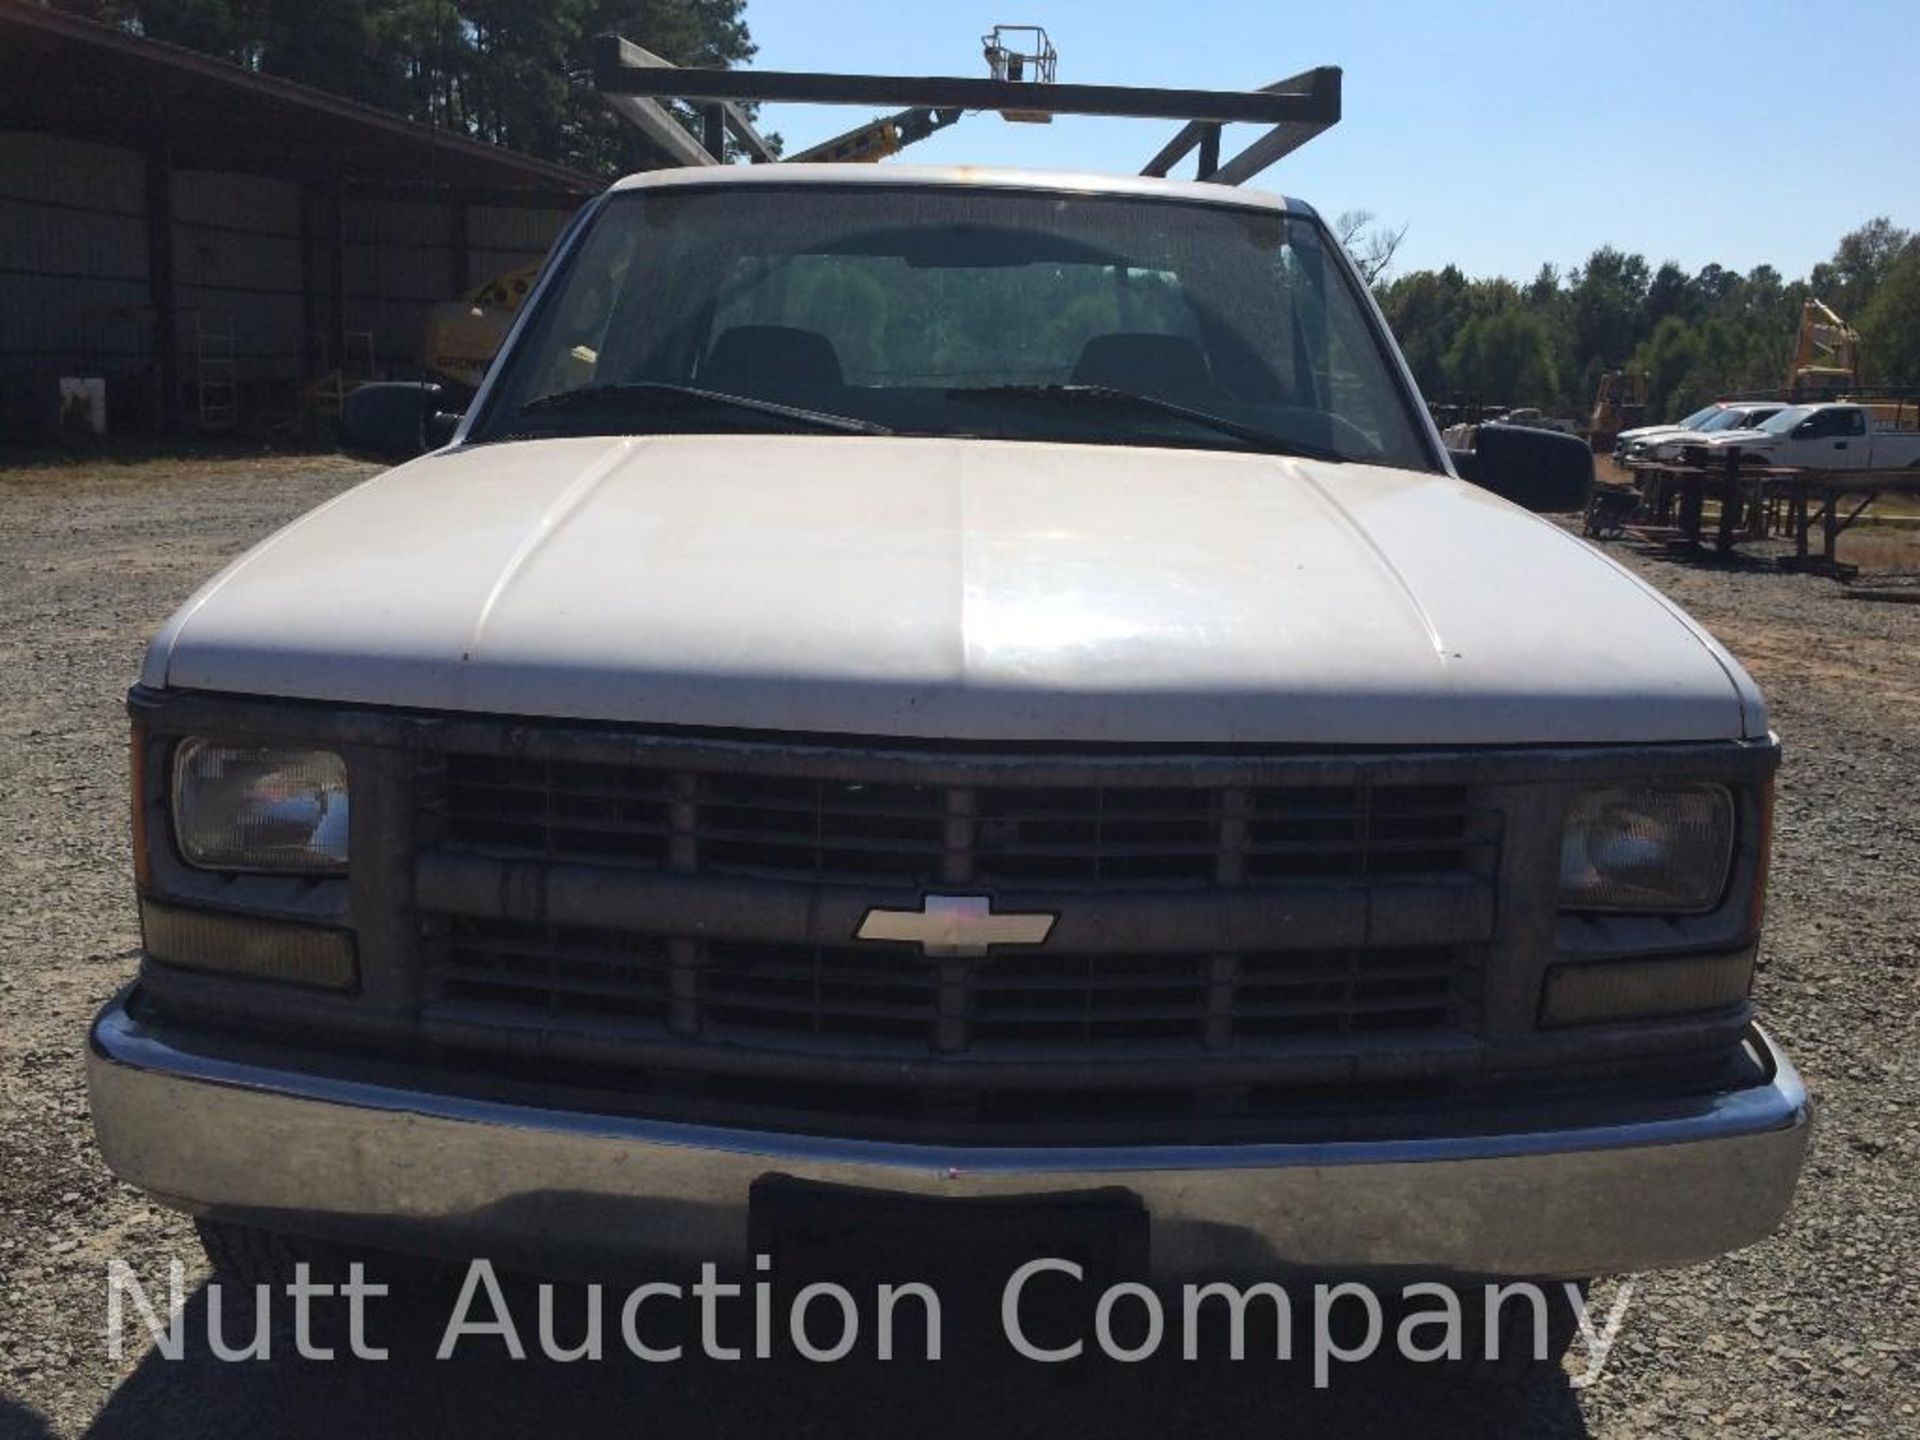 1998 Chevrolet C2500 Truck Mileage: 144,855, Body Type: 2 Door, Cab; Extended, Trim Level: Base, - Image 8 of 15